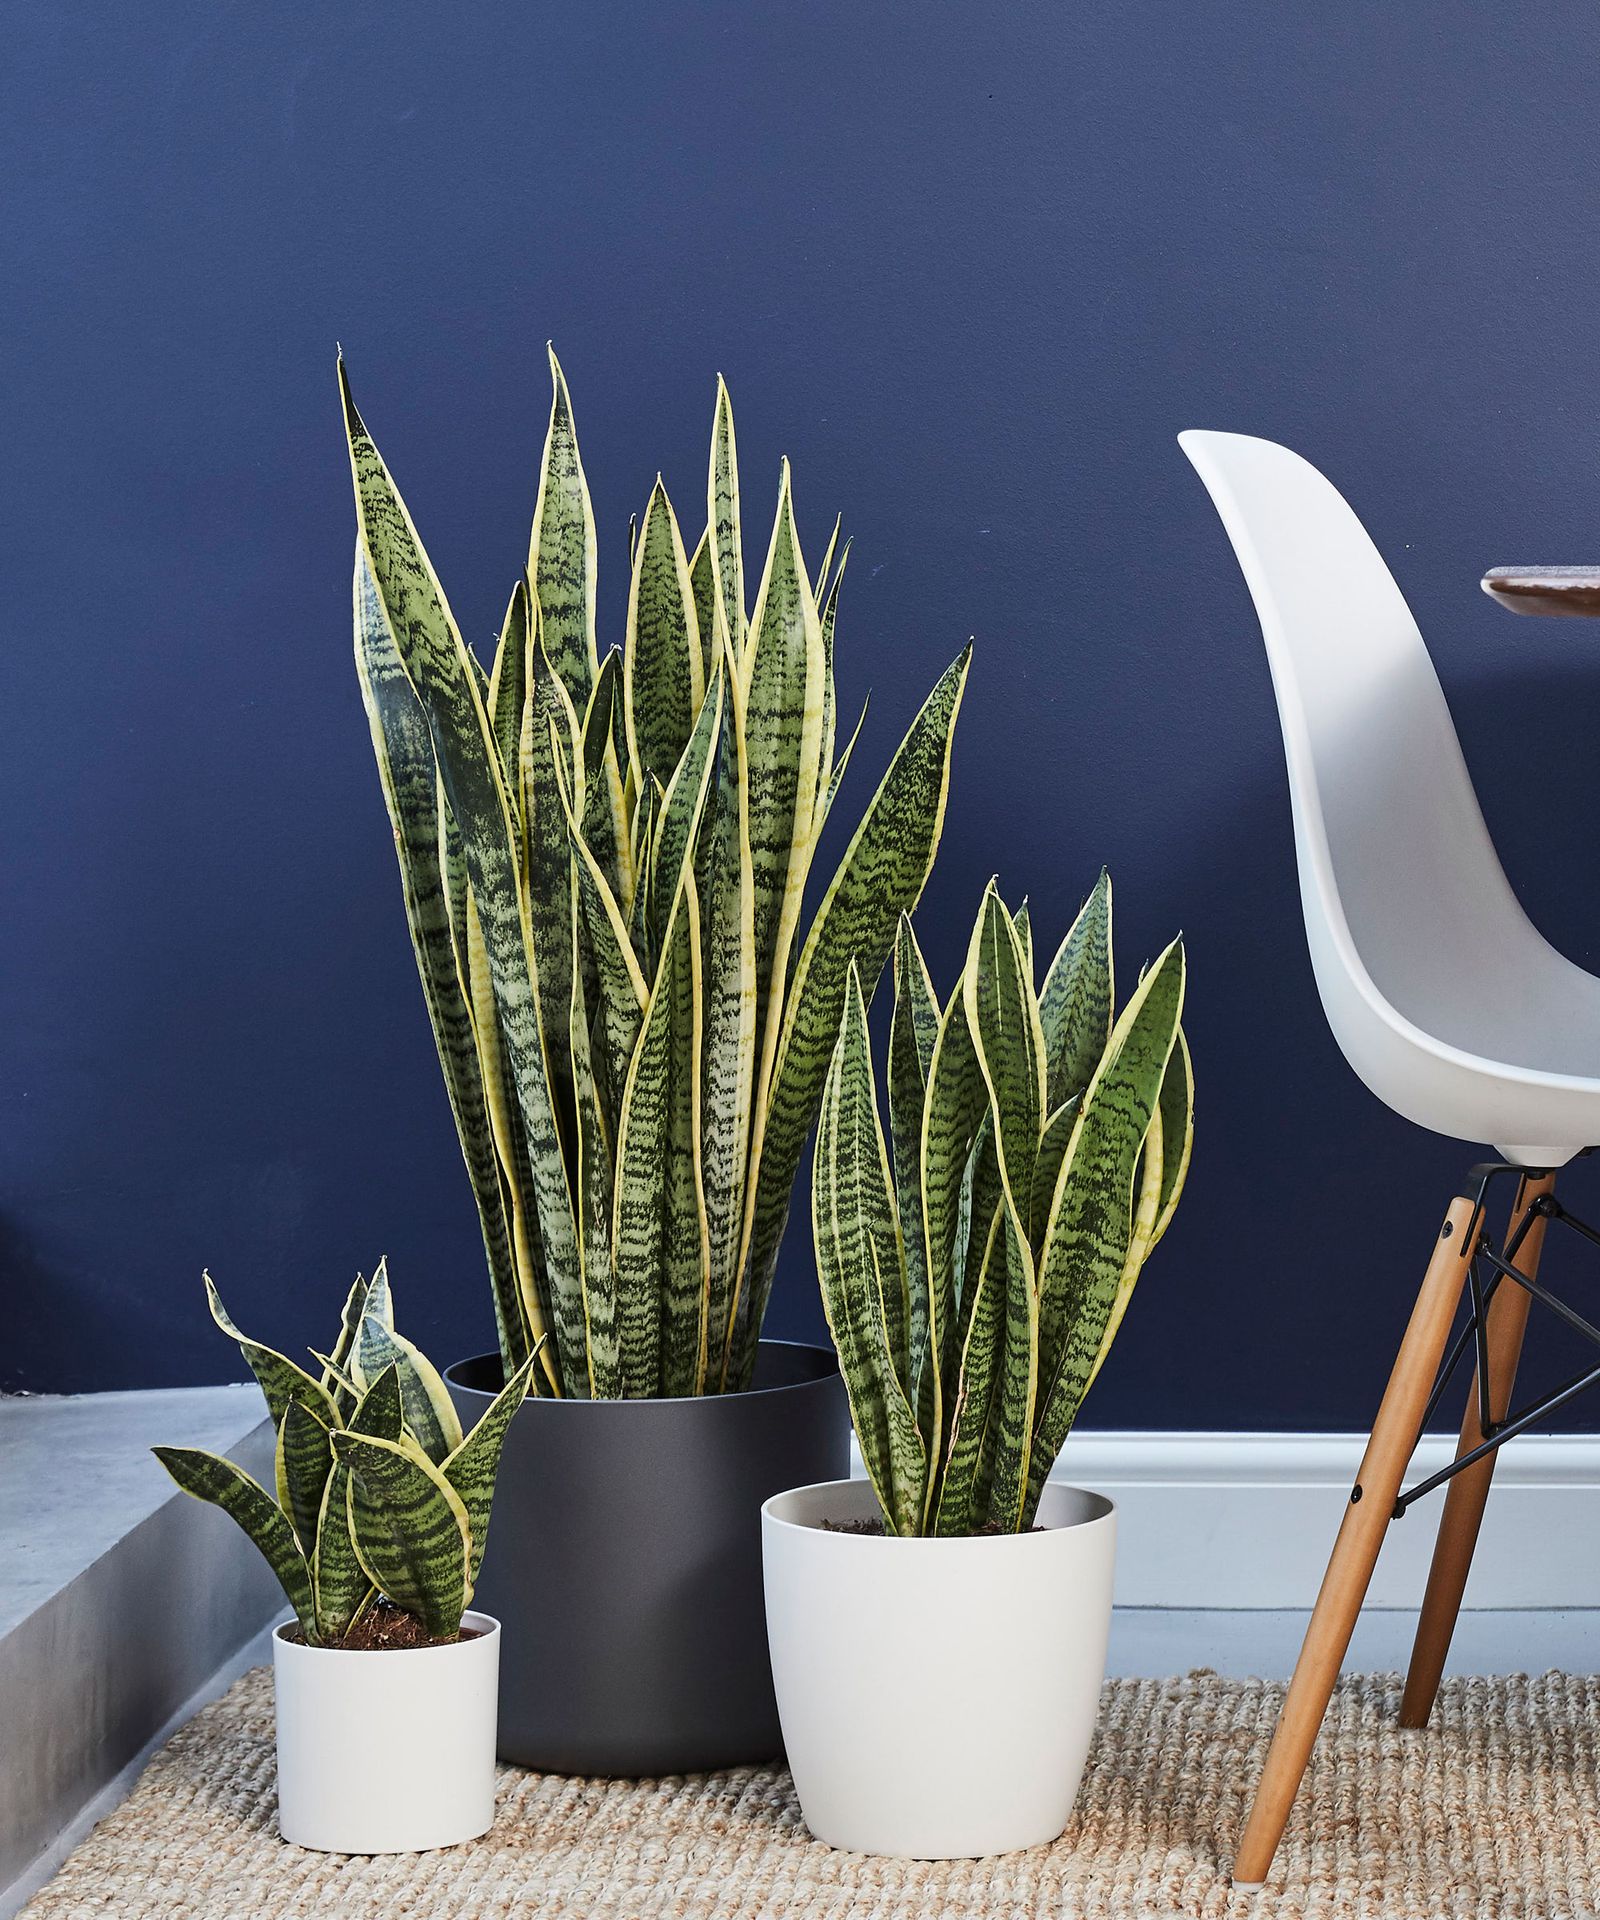 12 low-light indoor plants for shady spots in your home | Gardeningetc